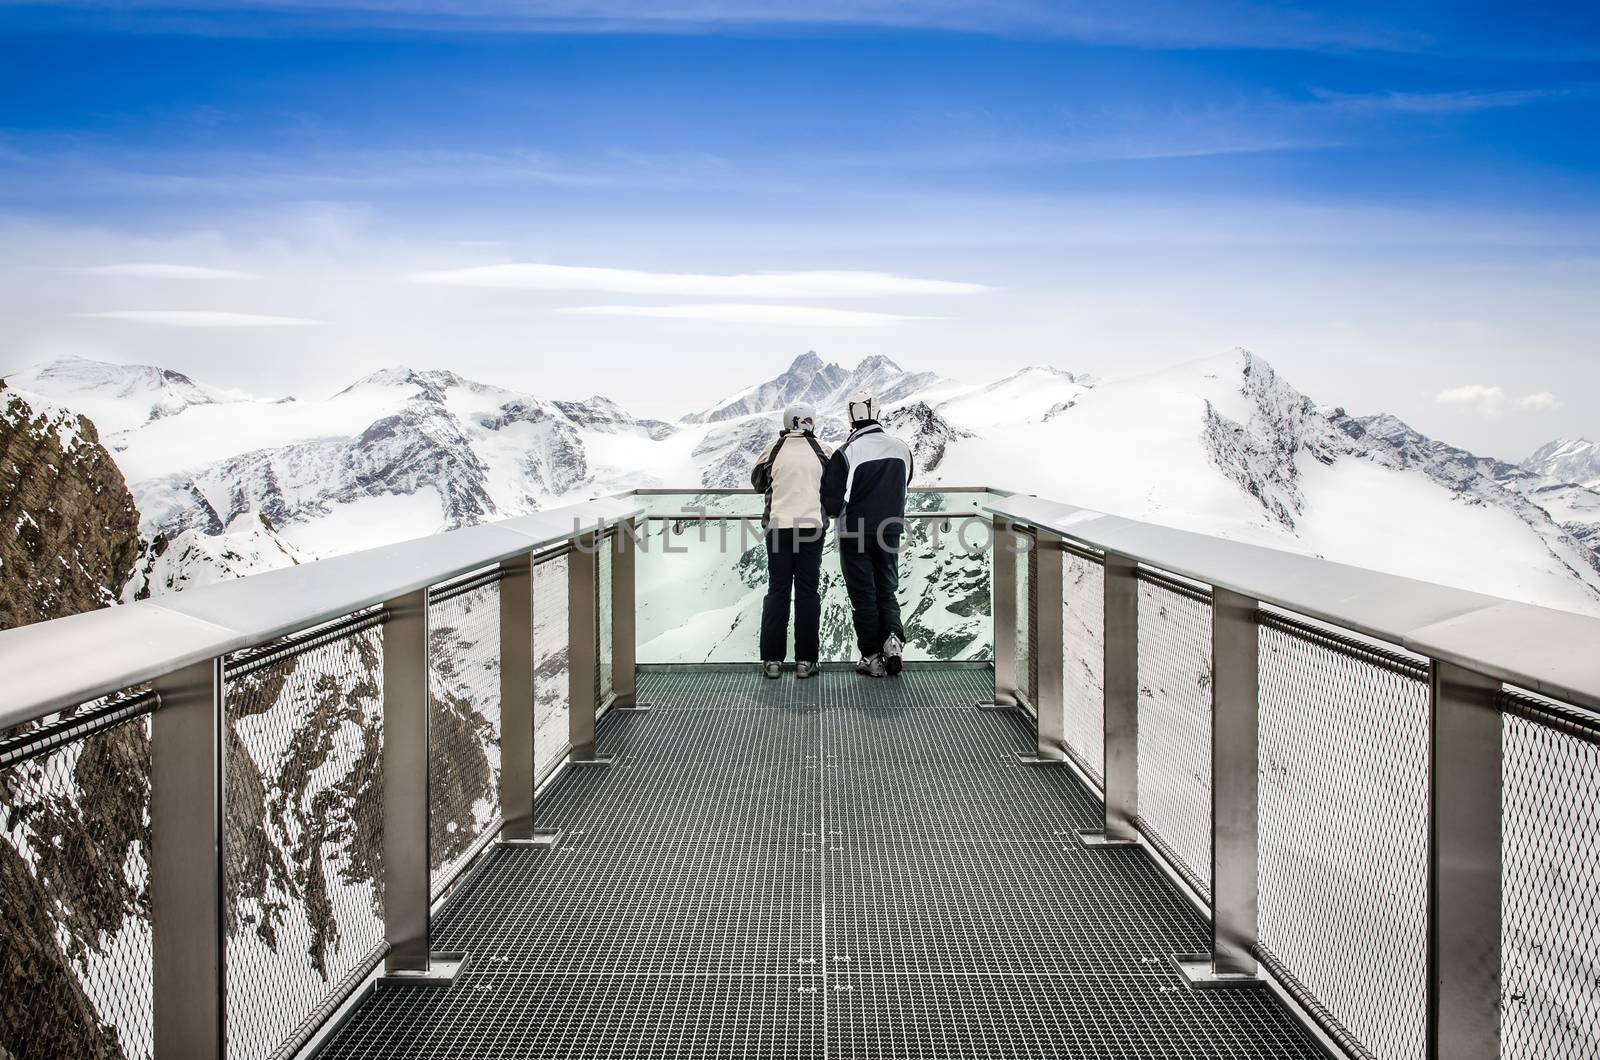 Two people looking at Alps mountains from viewpoint platform, Kaprun area, Austria